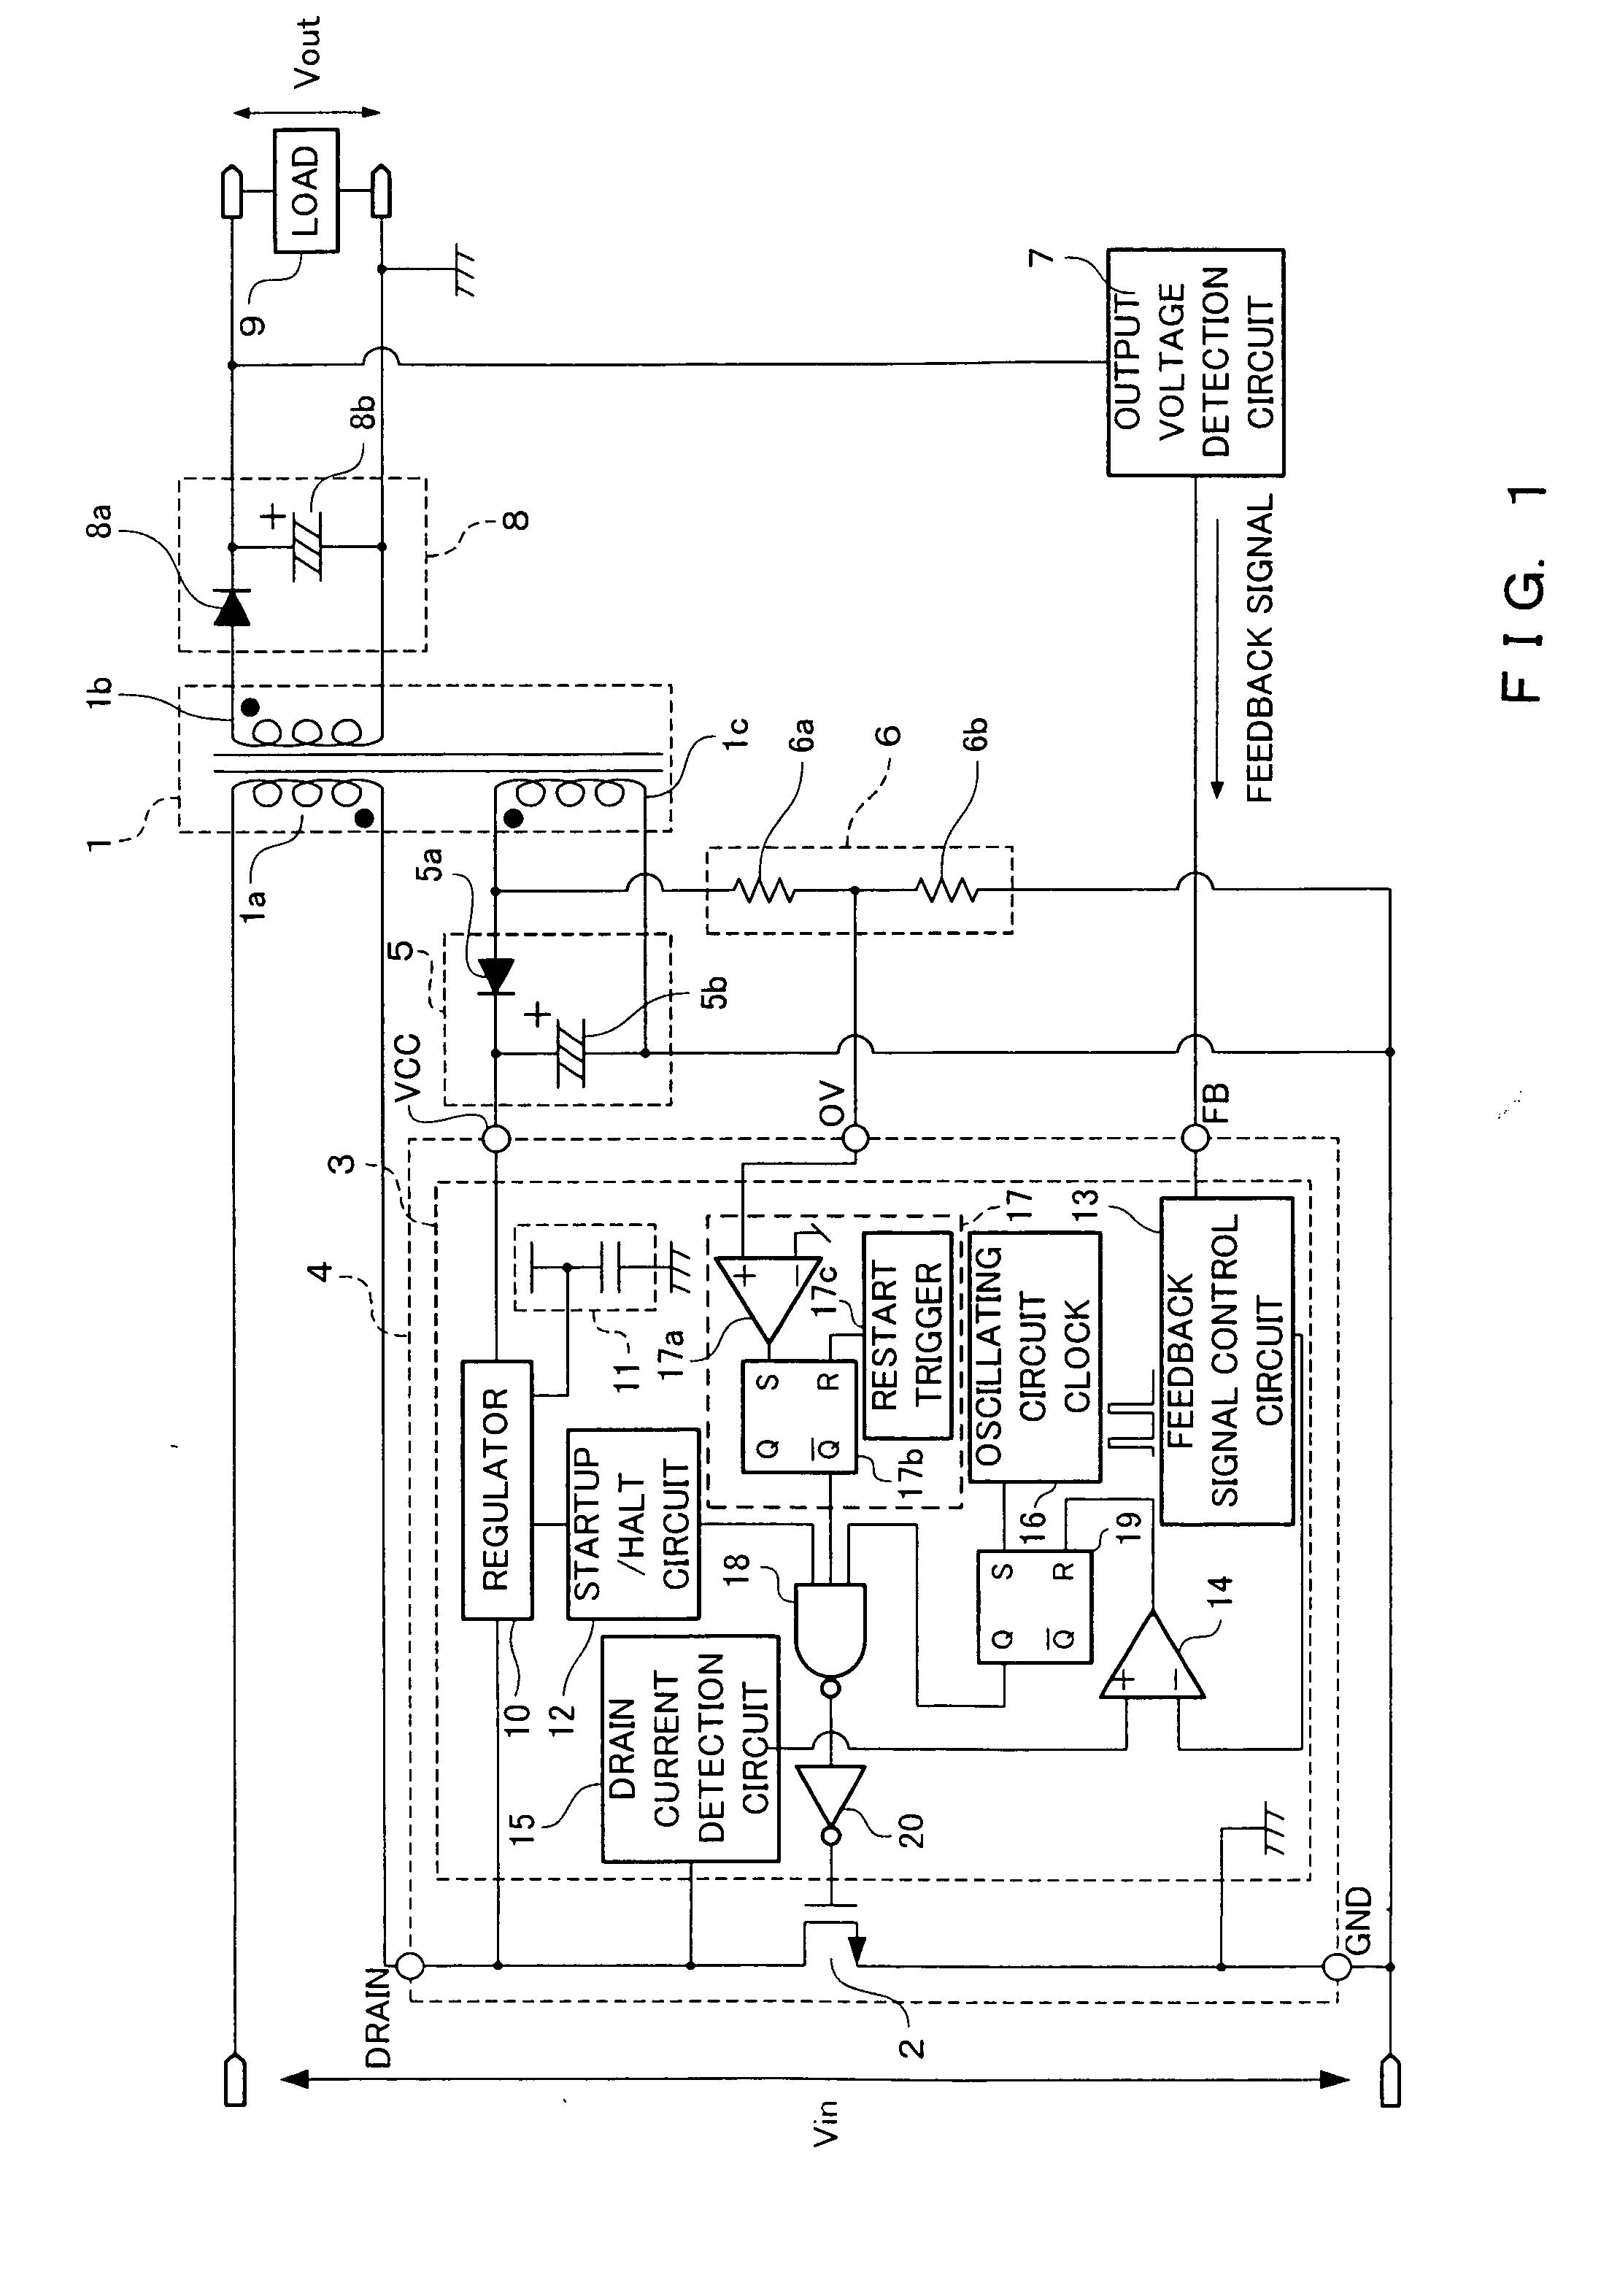 Switching power supply apparatus and semiconductor device used in the switching power supply apparatus